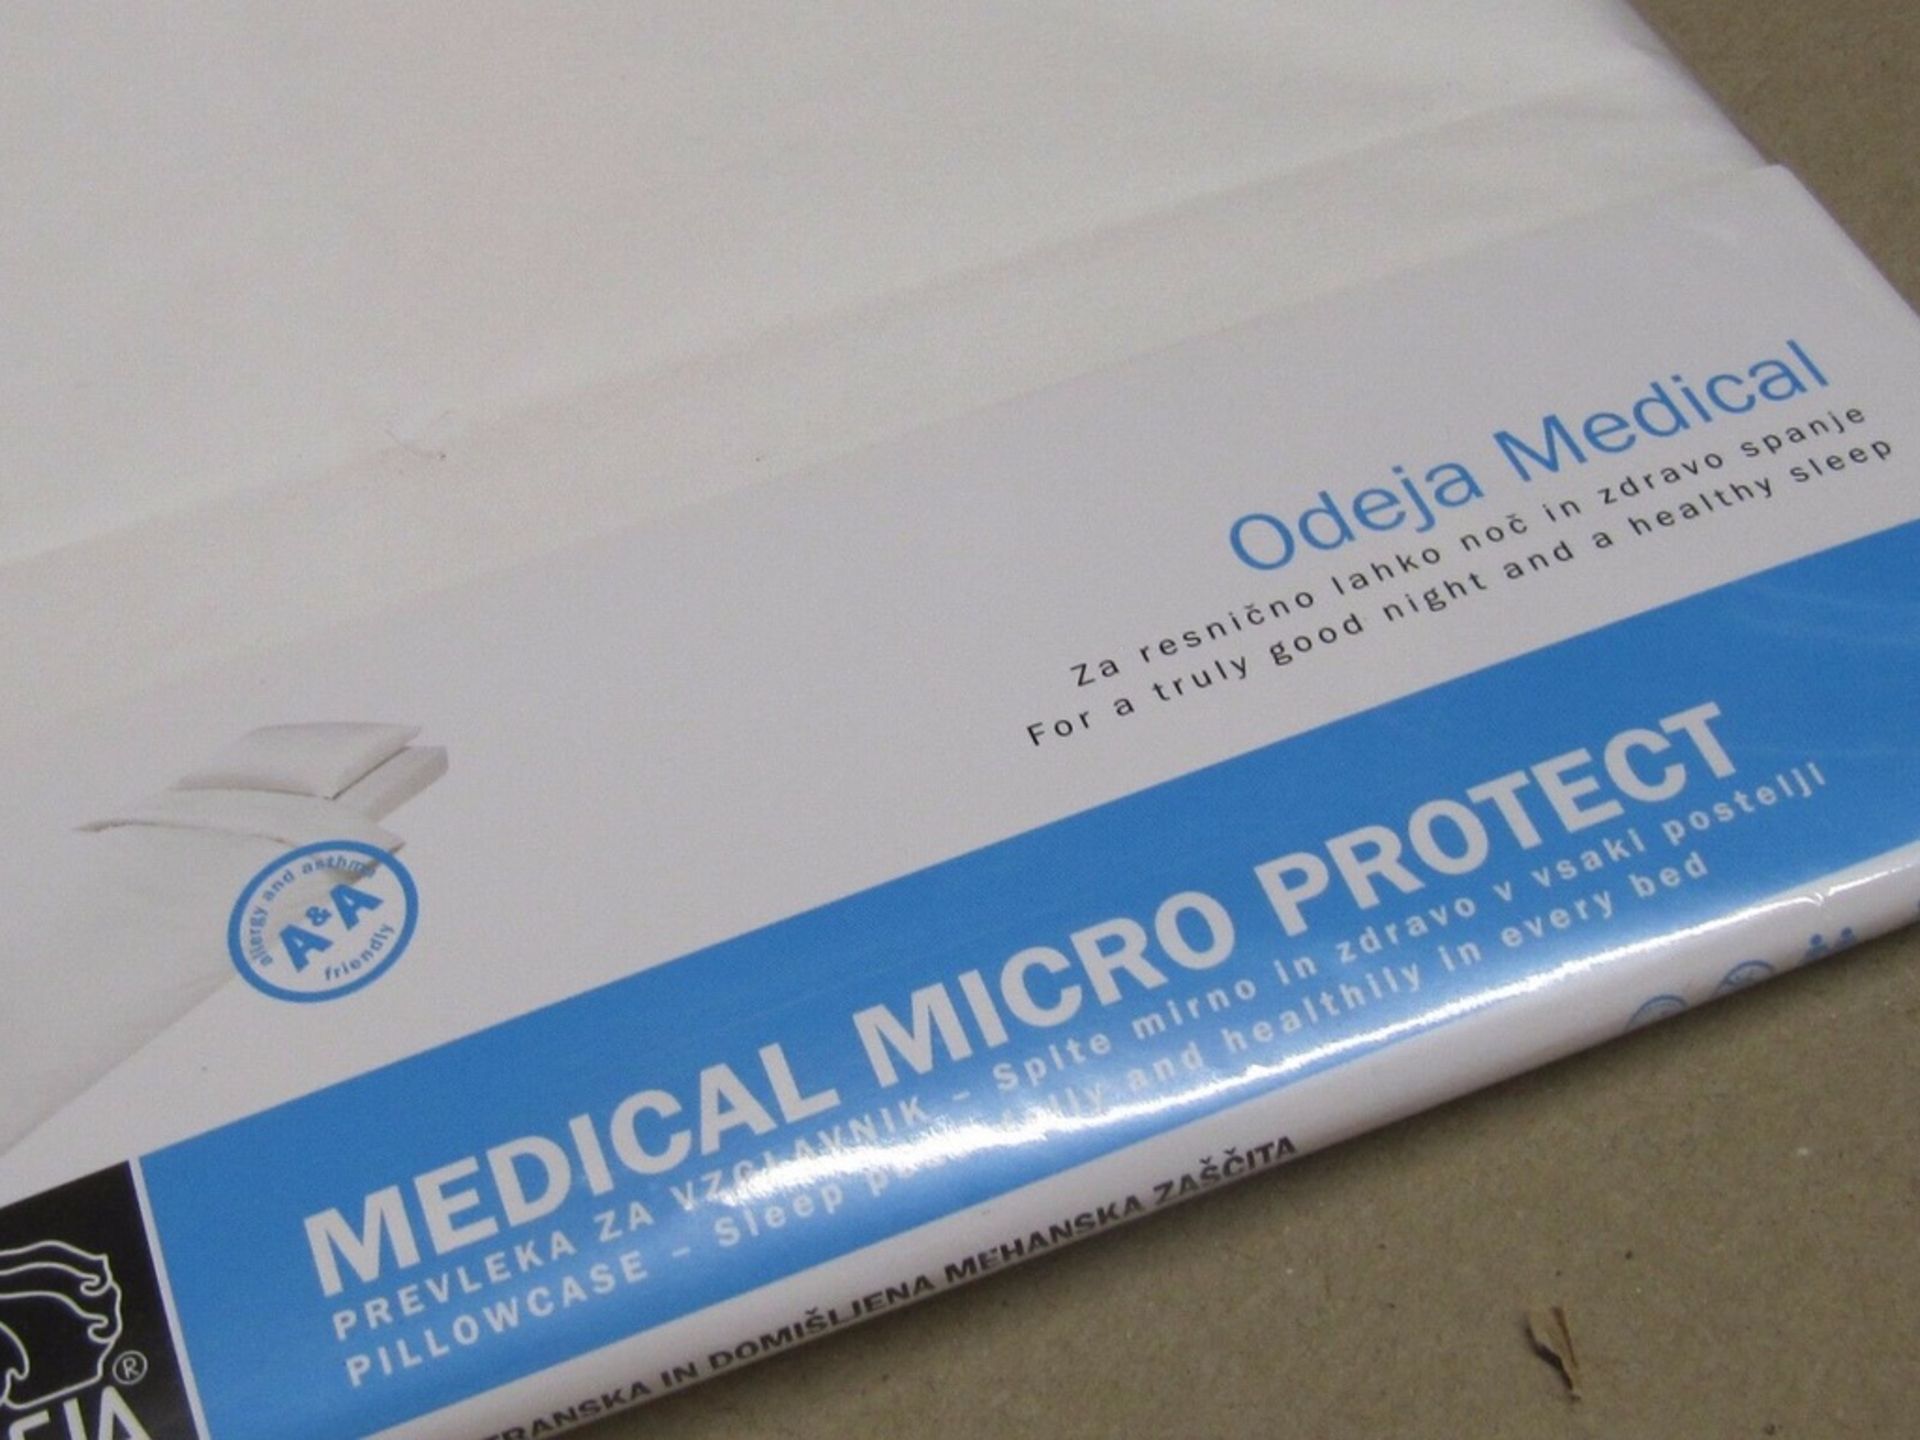 5 x Allergies Pillow Case. Medical Micro Protect Cover. by ODEJA no vat on hammer.You will get 5 - Image 3 of 3